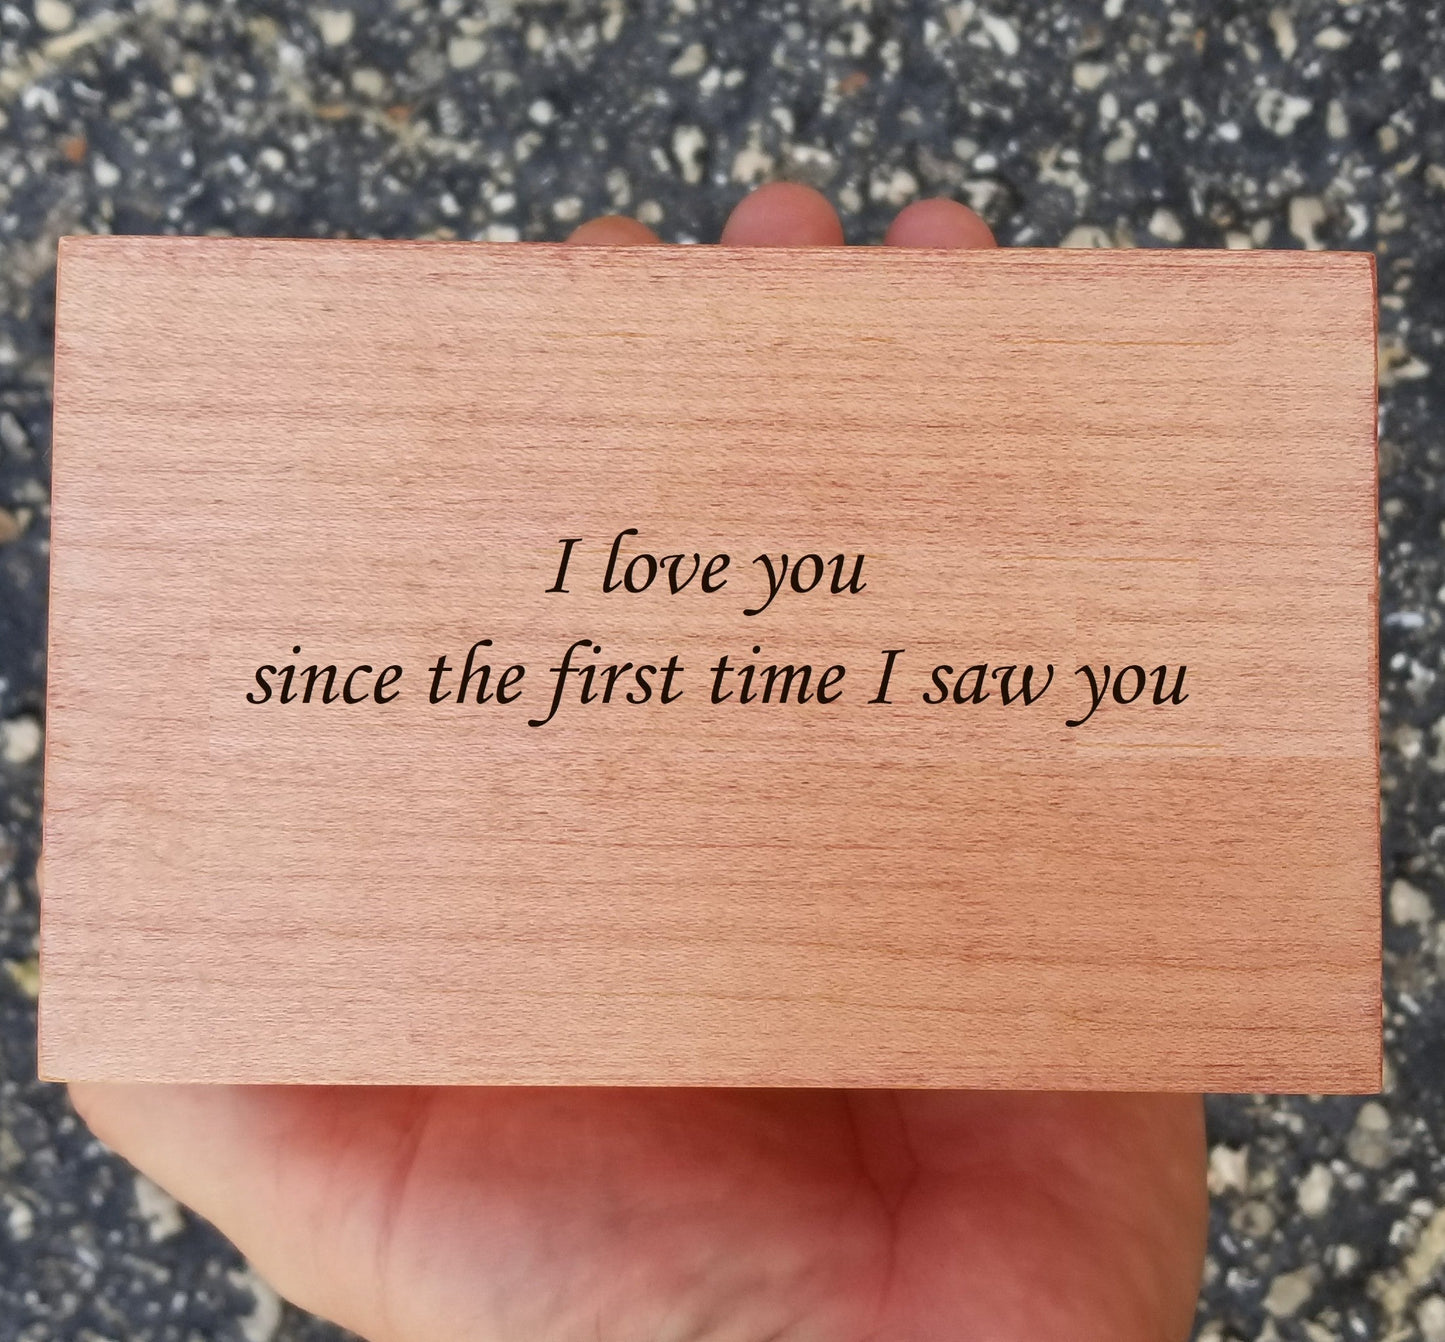 personalized message added on the bottom side of the jewelry box if requested